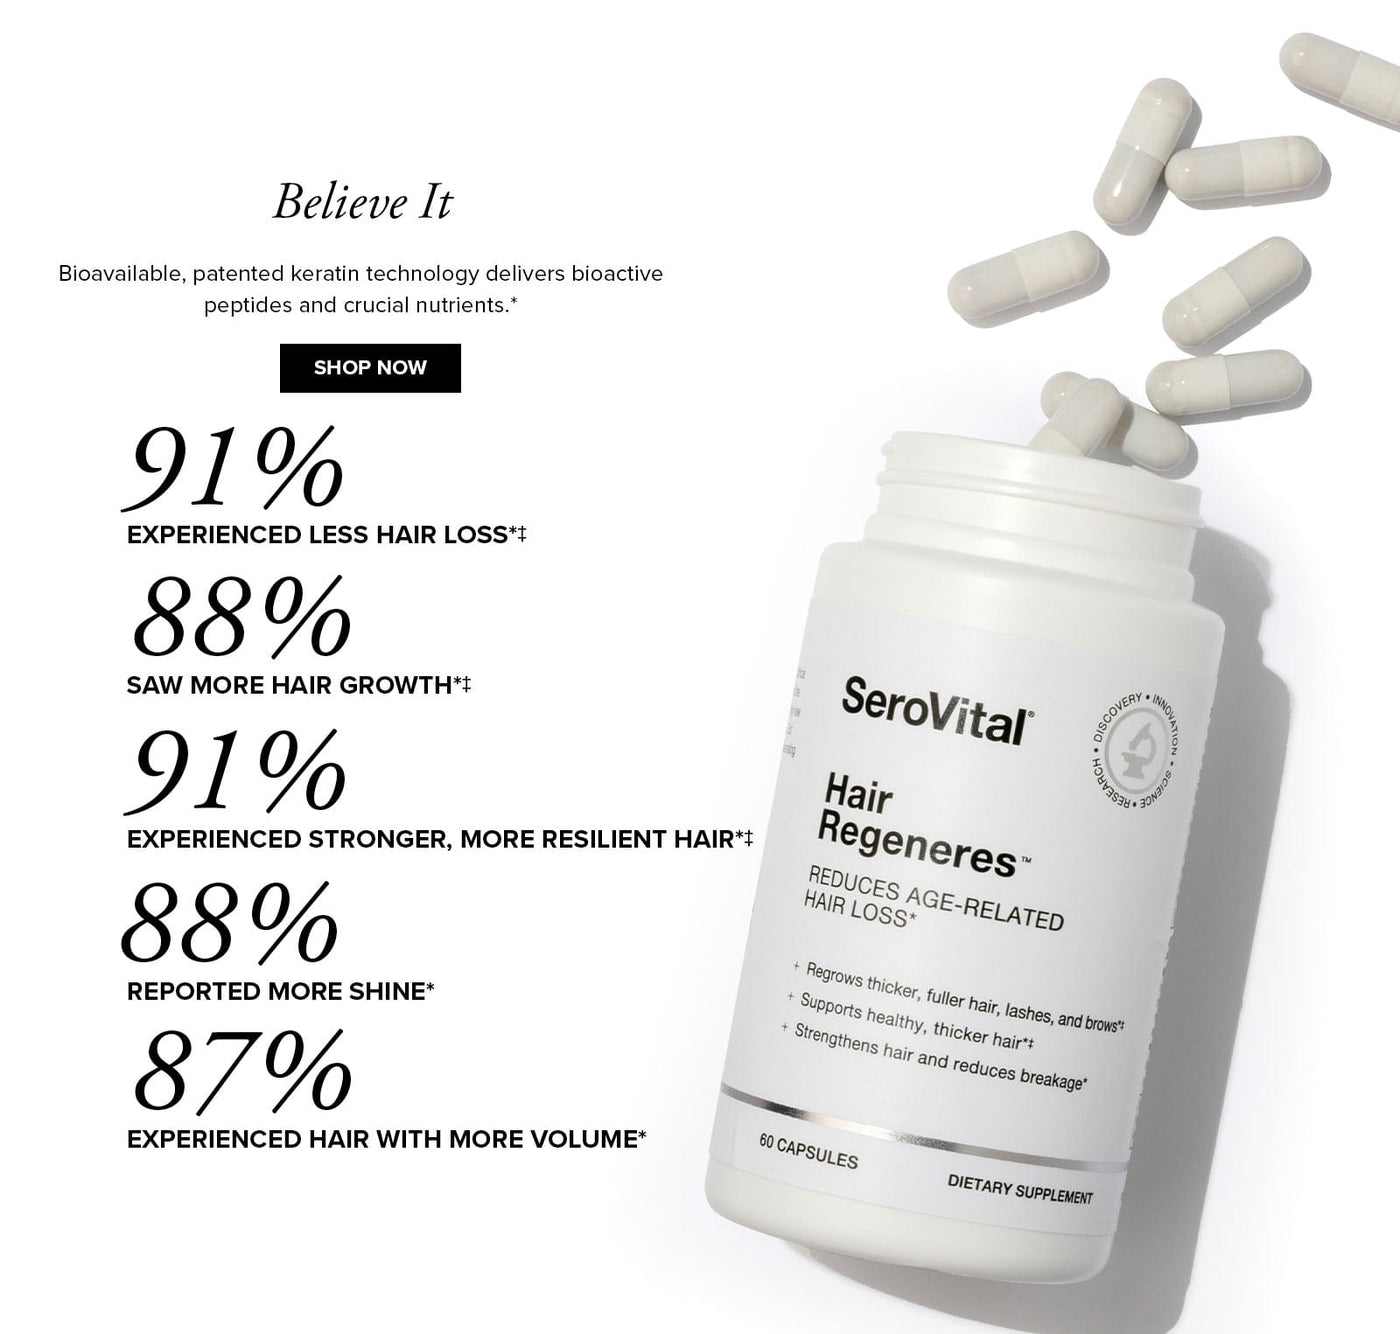 A list of percentages showing that in a consumer perception study on the key compound, after 120 days, 91% experienced less hair loss and 88% saw more hair growth